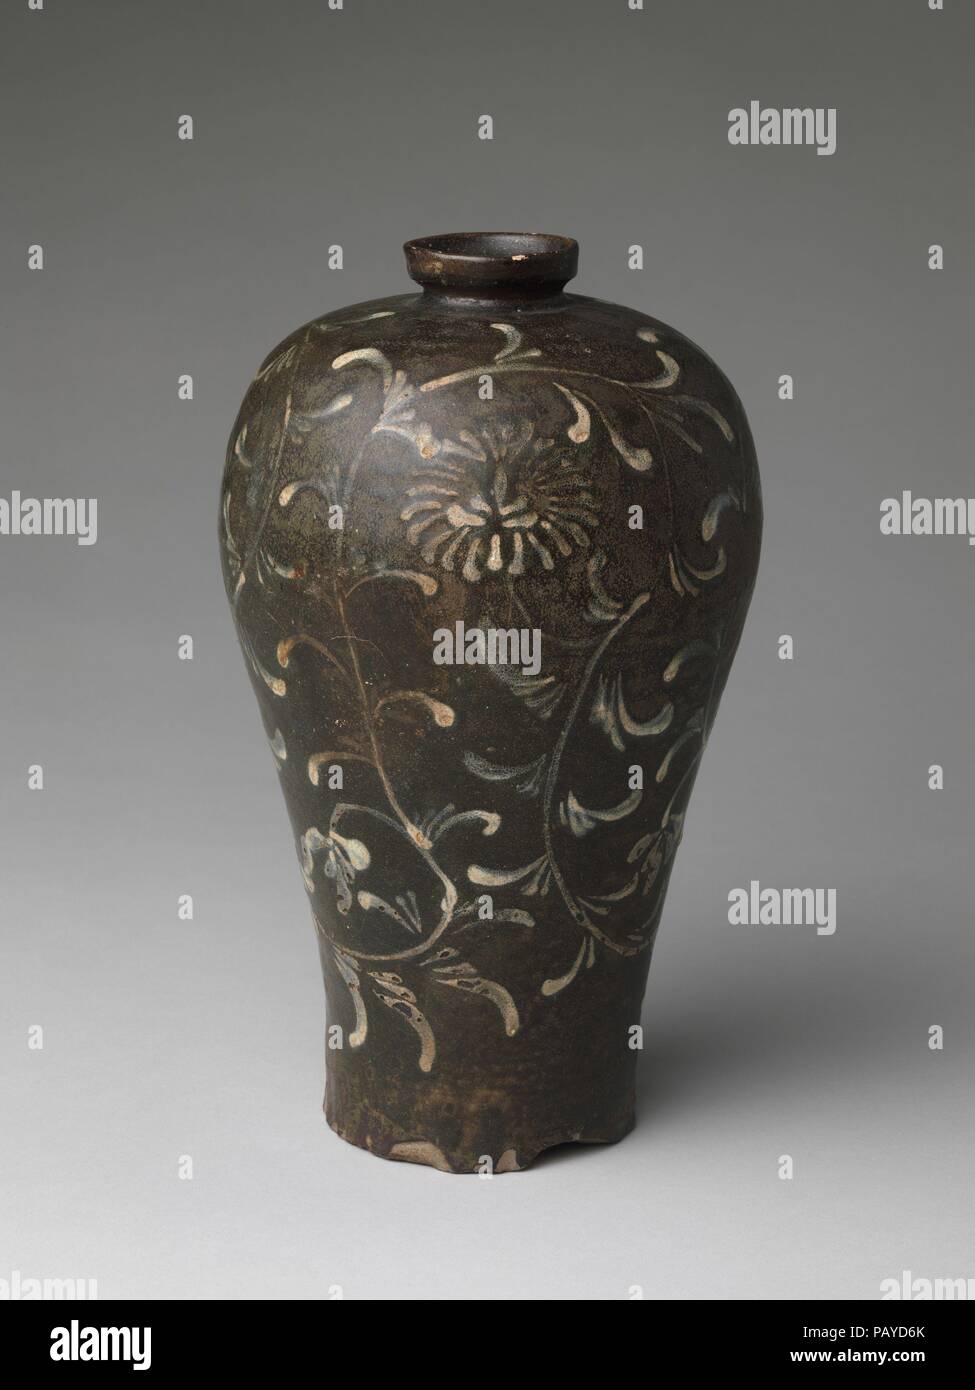 Maebyeong with chrysanthemum decoration. Culture: Korea. Dimensions: H. 10 3/4 in. (27.3 cm); Diam. 6 3/8 in. (16.2 cm). Date: 13th century.  Maebyeong, a Korean transliteration of the Chinese term meiping (plum bottle), refers to a shape like this vessel's, with rounded shoulders and curved contours as well as a distinctive lip. Museum: Metropolitan Museum of Art, New York, USA. Stock Photo